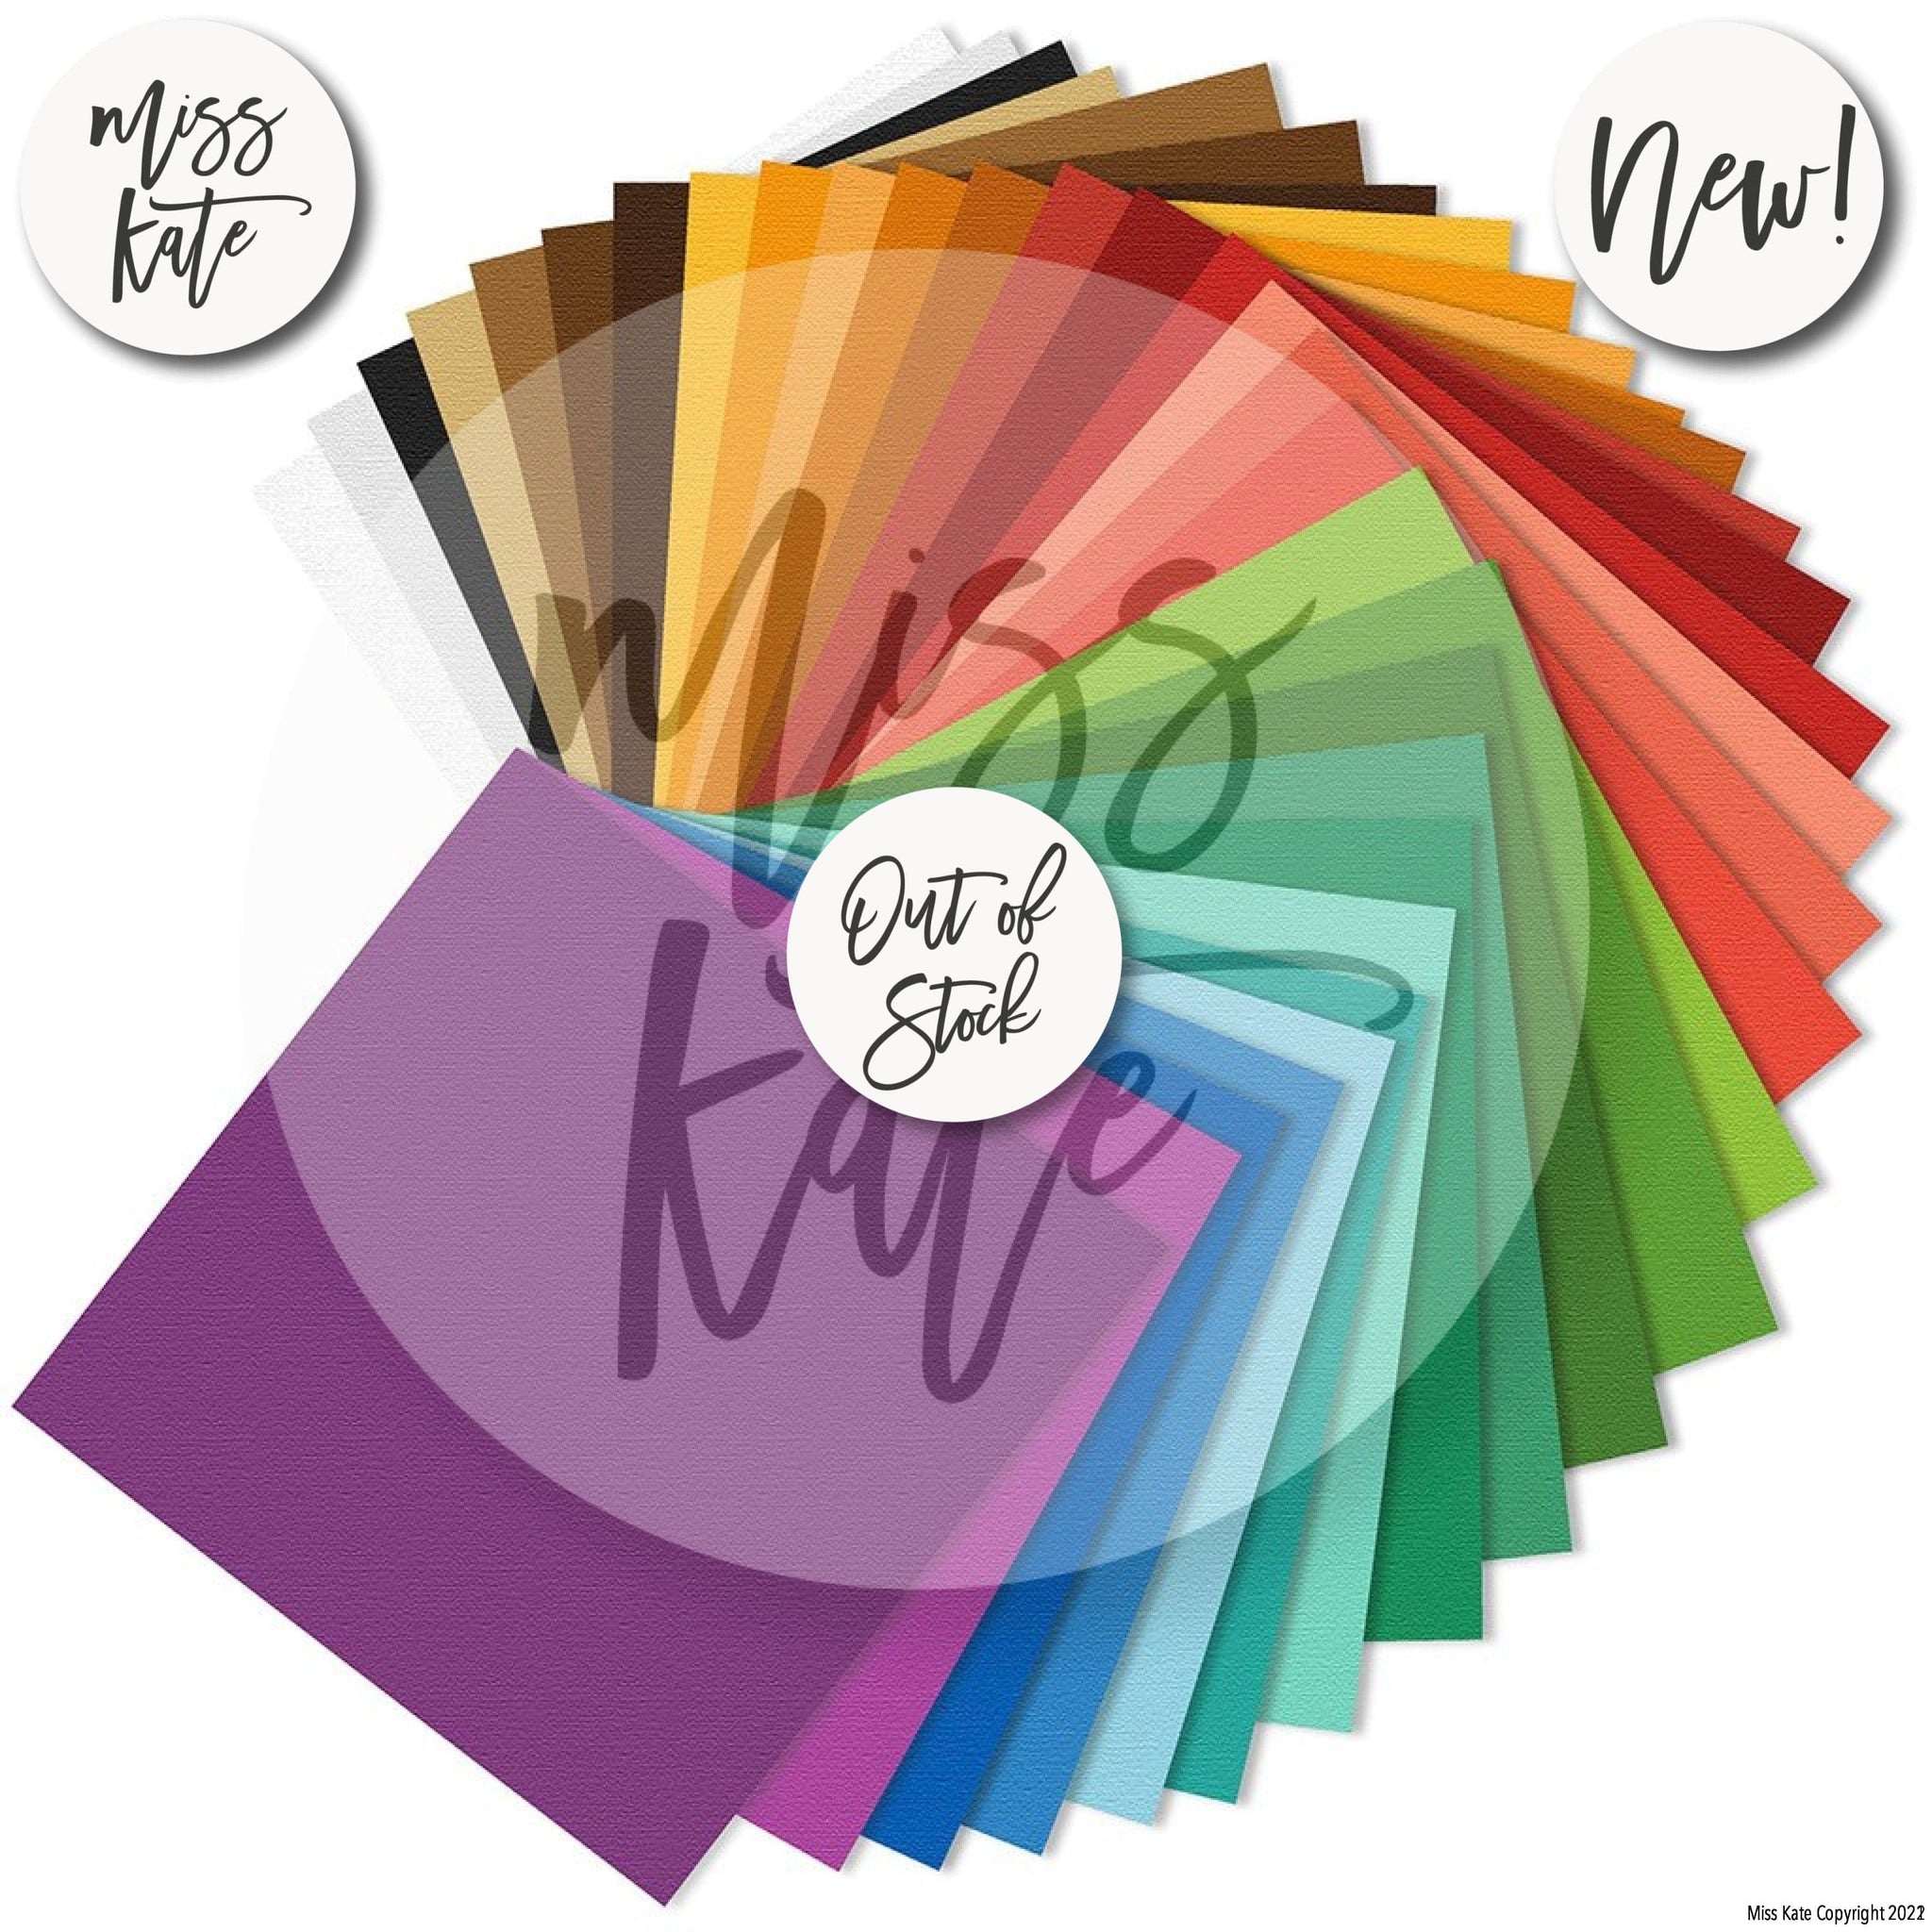 Livholic 108 Sheets Colorful Cardstock paper,8.27x11.6 inch Colored Card Stock Pastel Construction Paper for DIY craft,scrapb